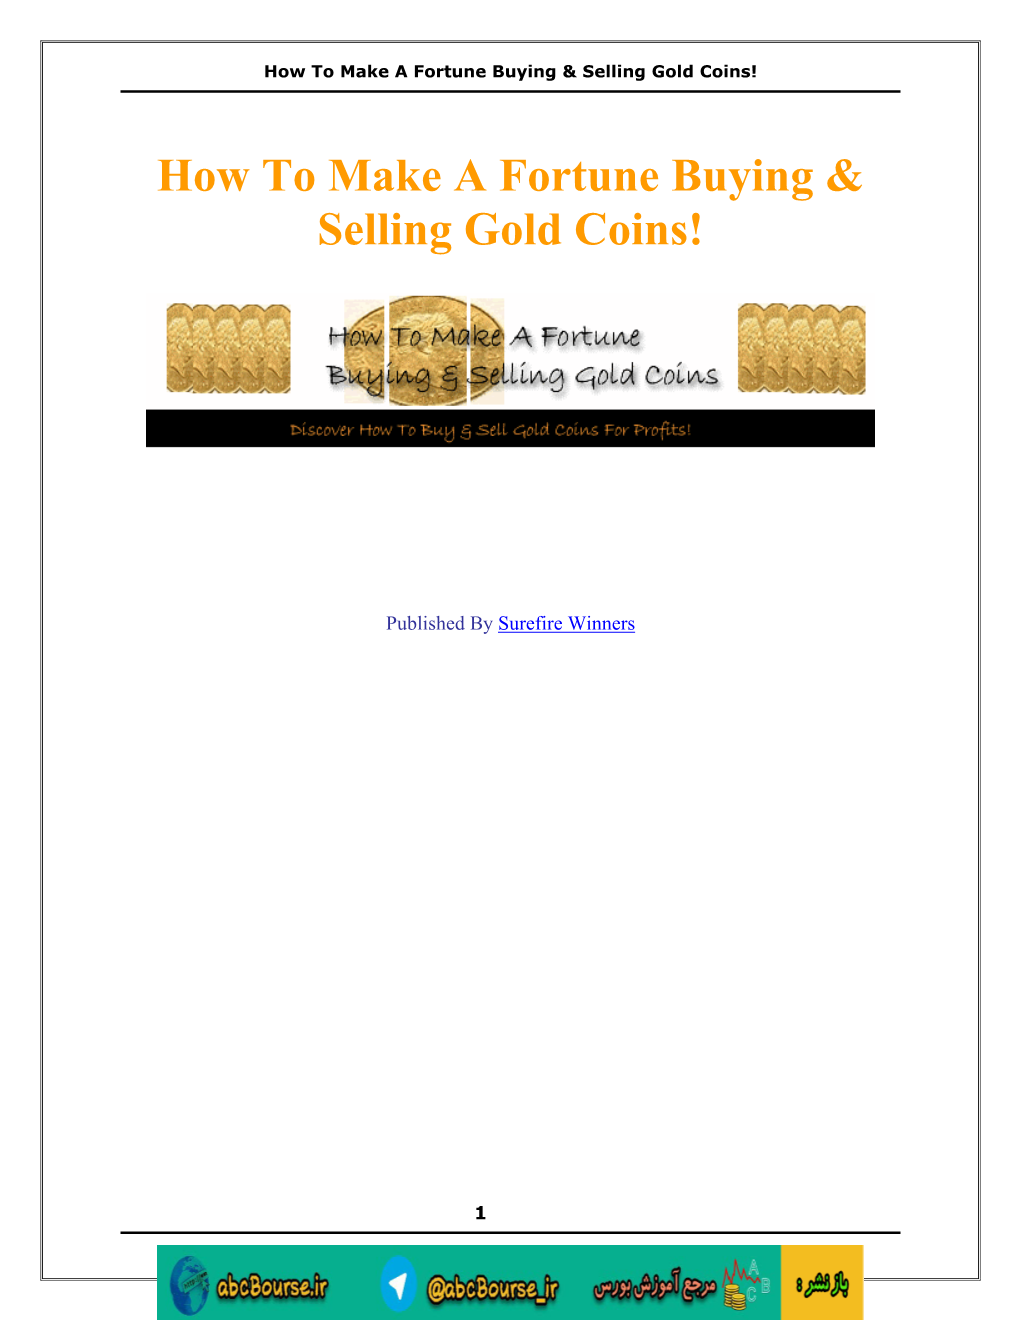 How to Make a Fortune Buying & Selling Gold Coins!